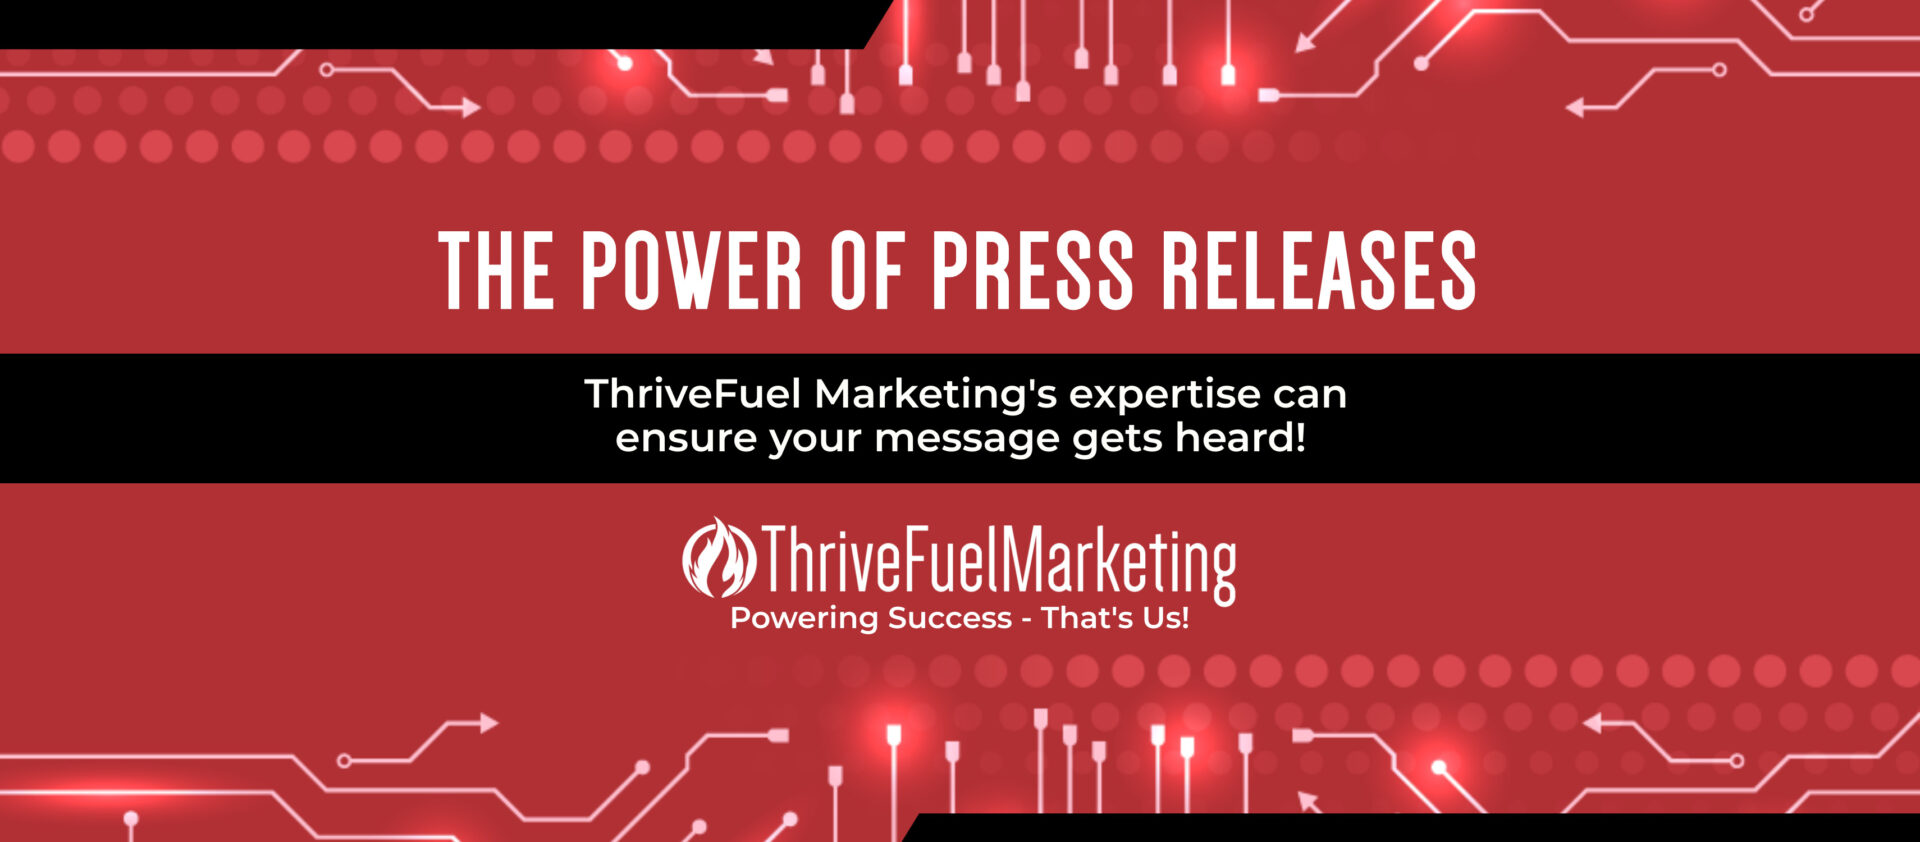 The Power of Press Releases: ThriveFuel Marketing’s Expertise in Getting Your Message Heard